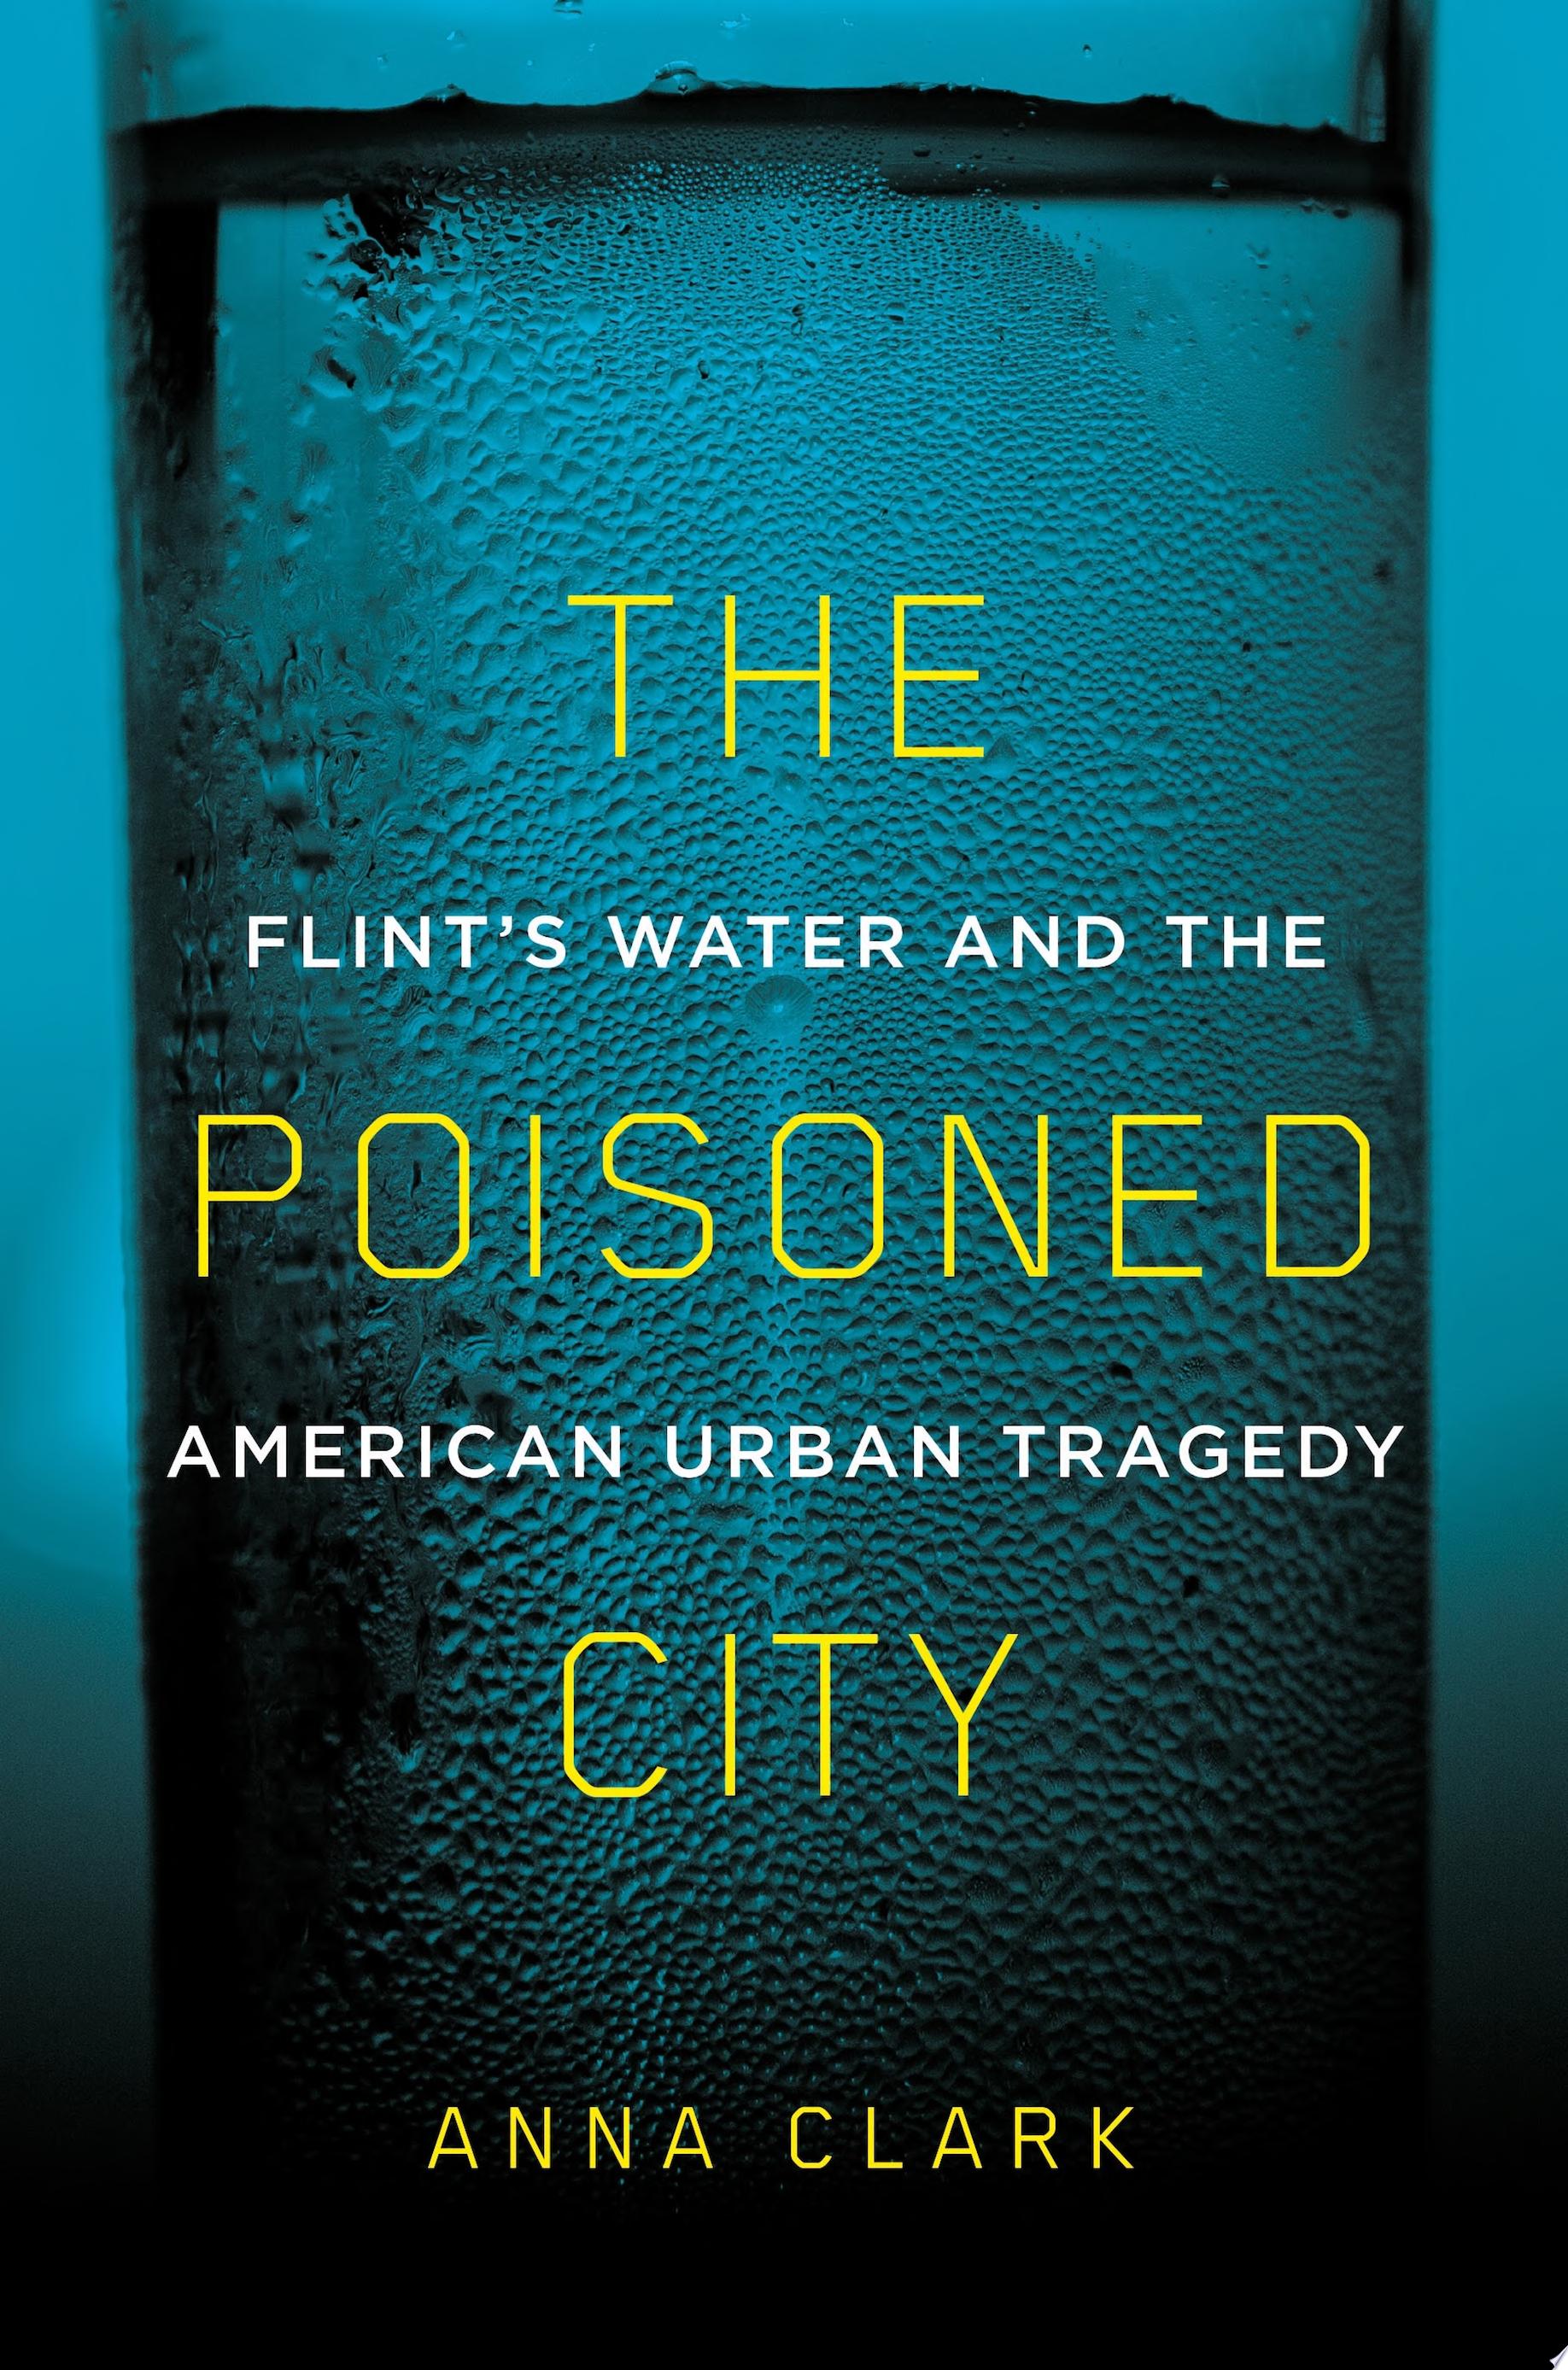 Image for "The Poisoned City"